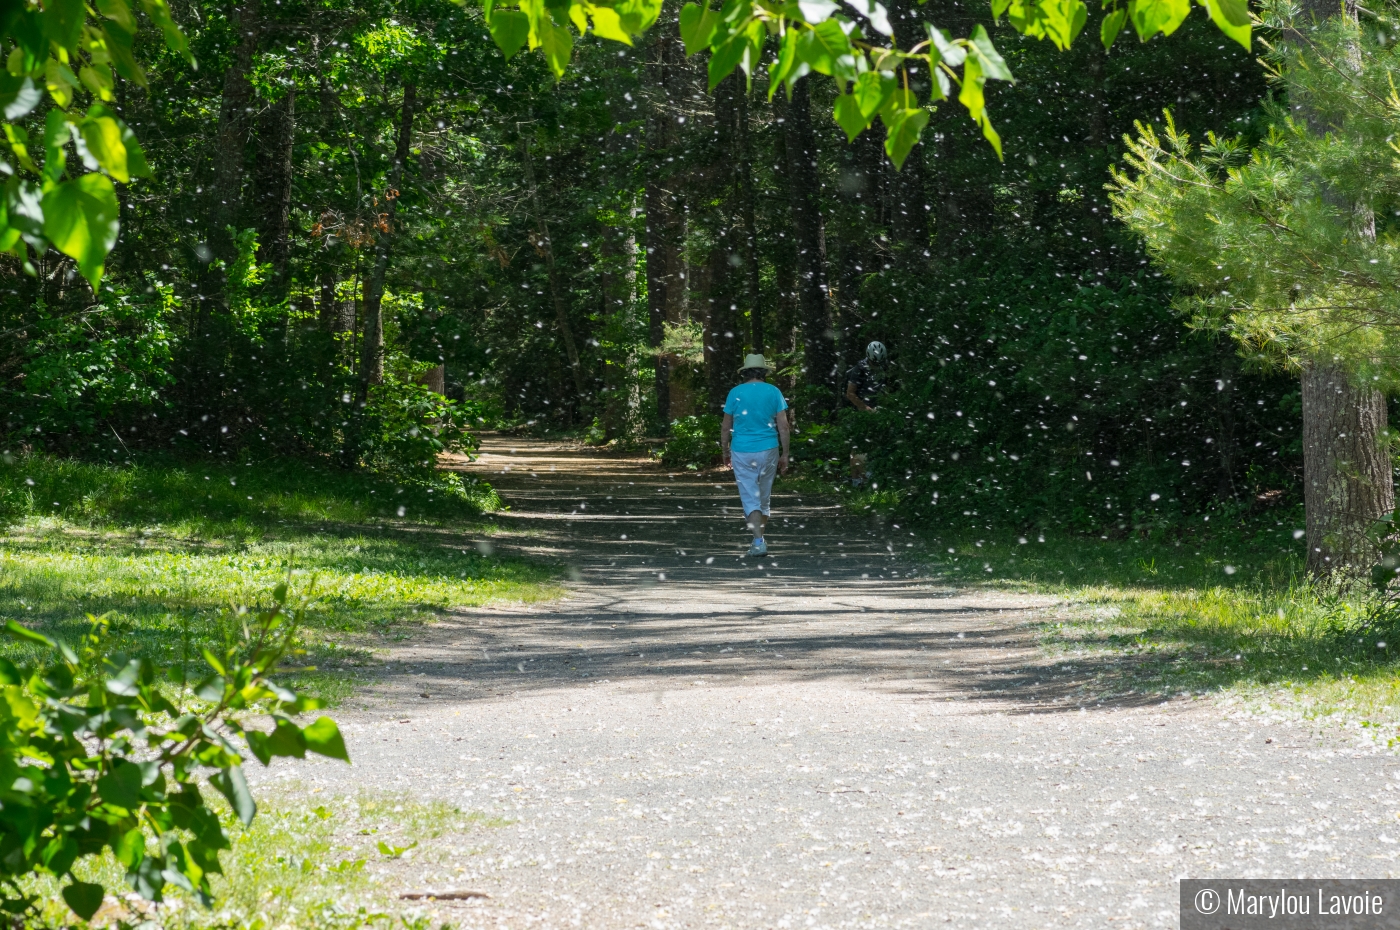 Spring Cottonwood Flurries At Stratton Brook State Park by Marylou Lavoie